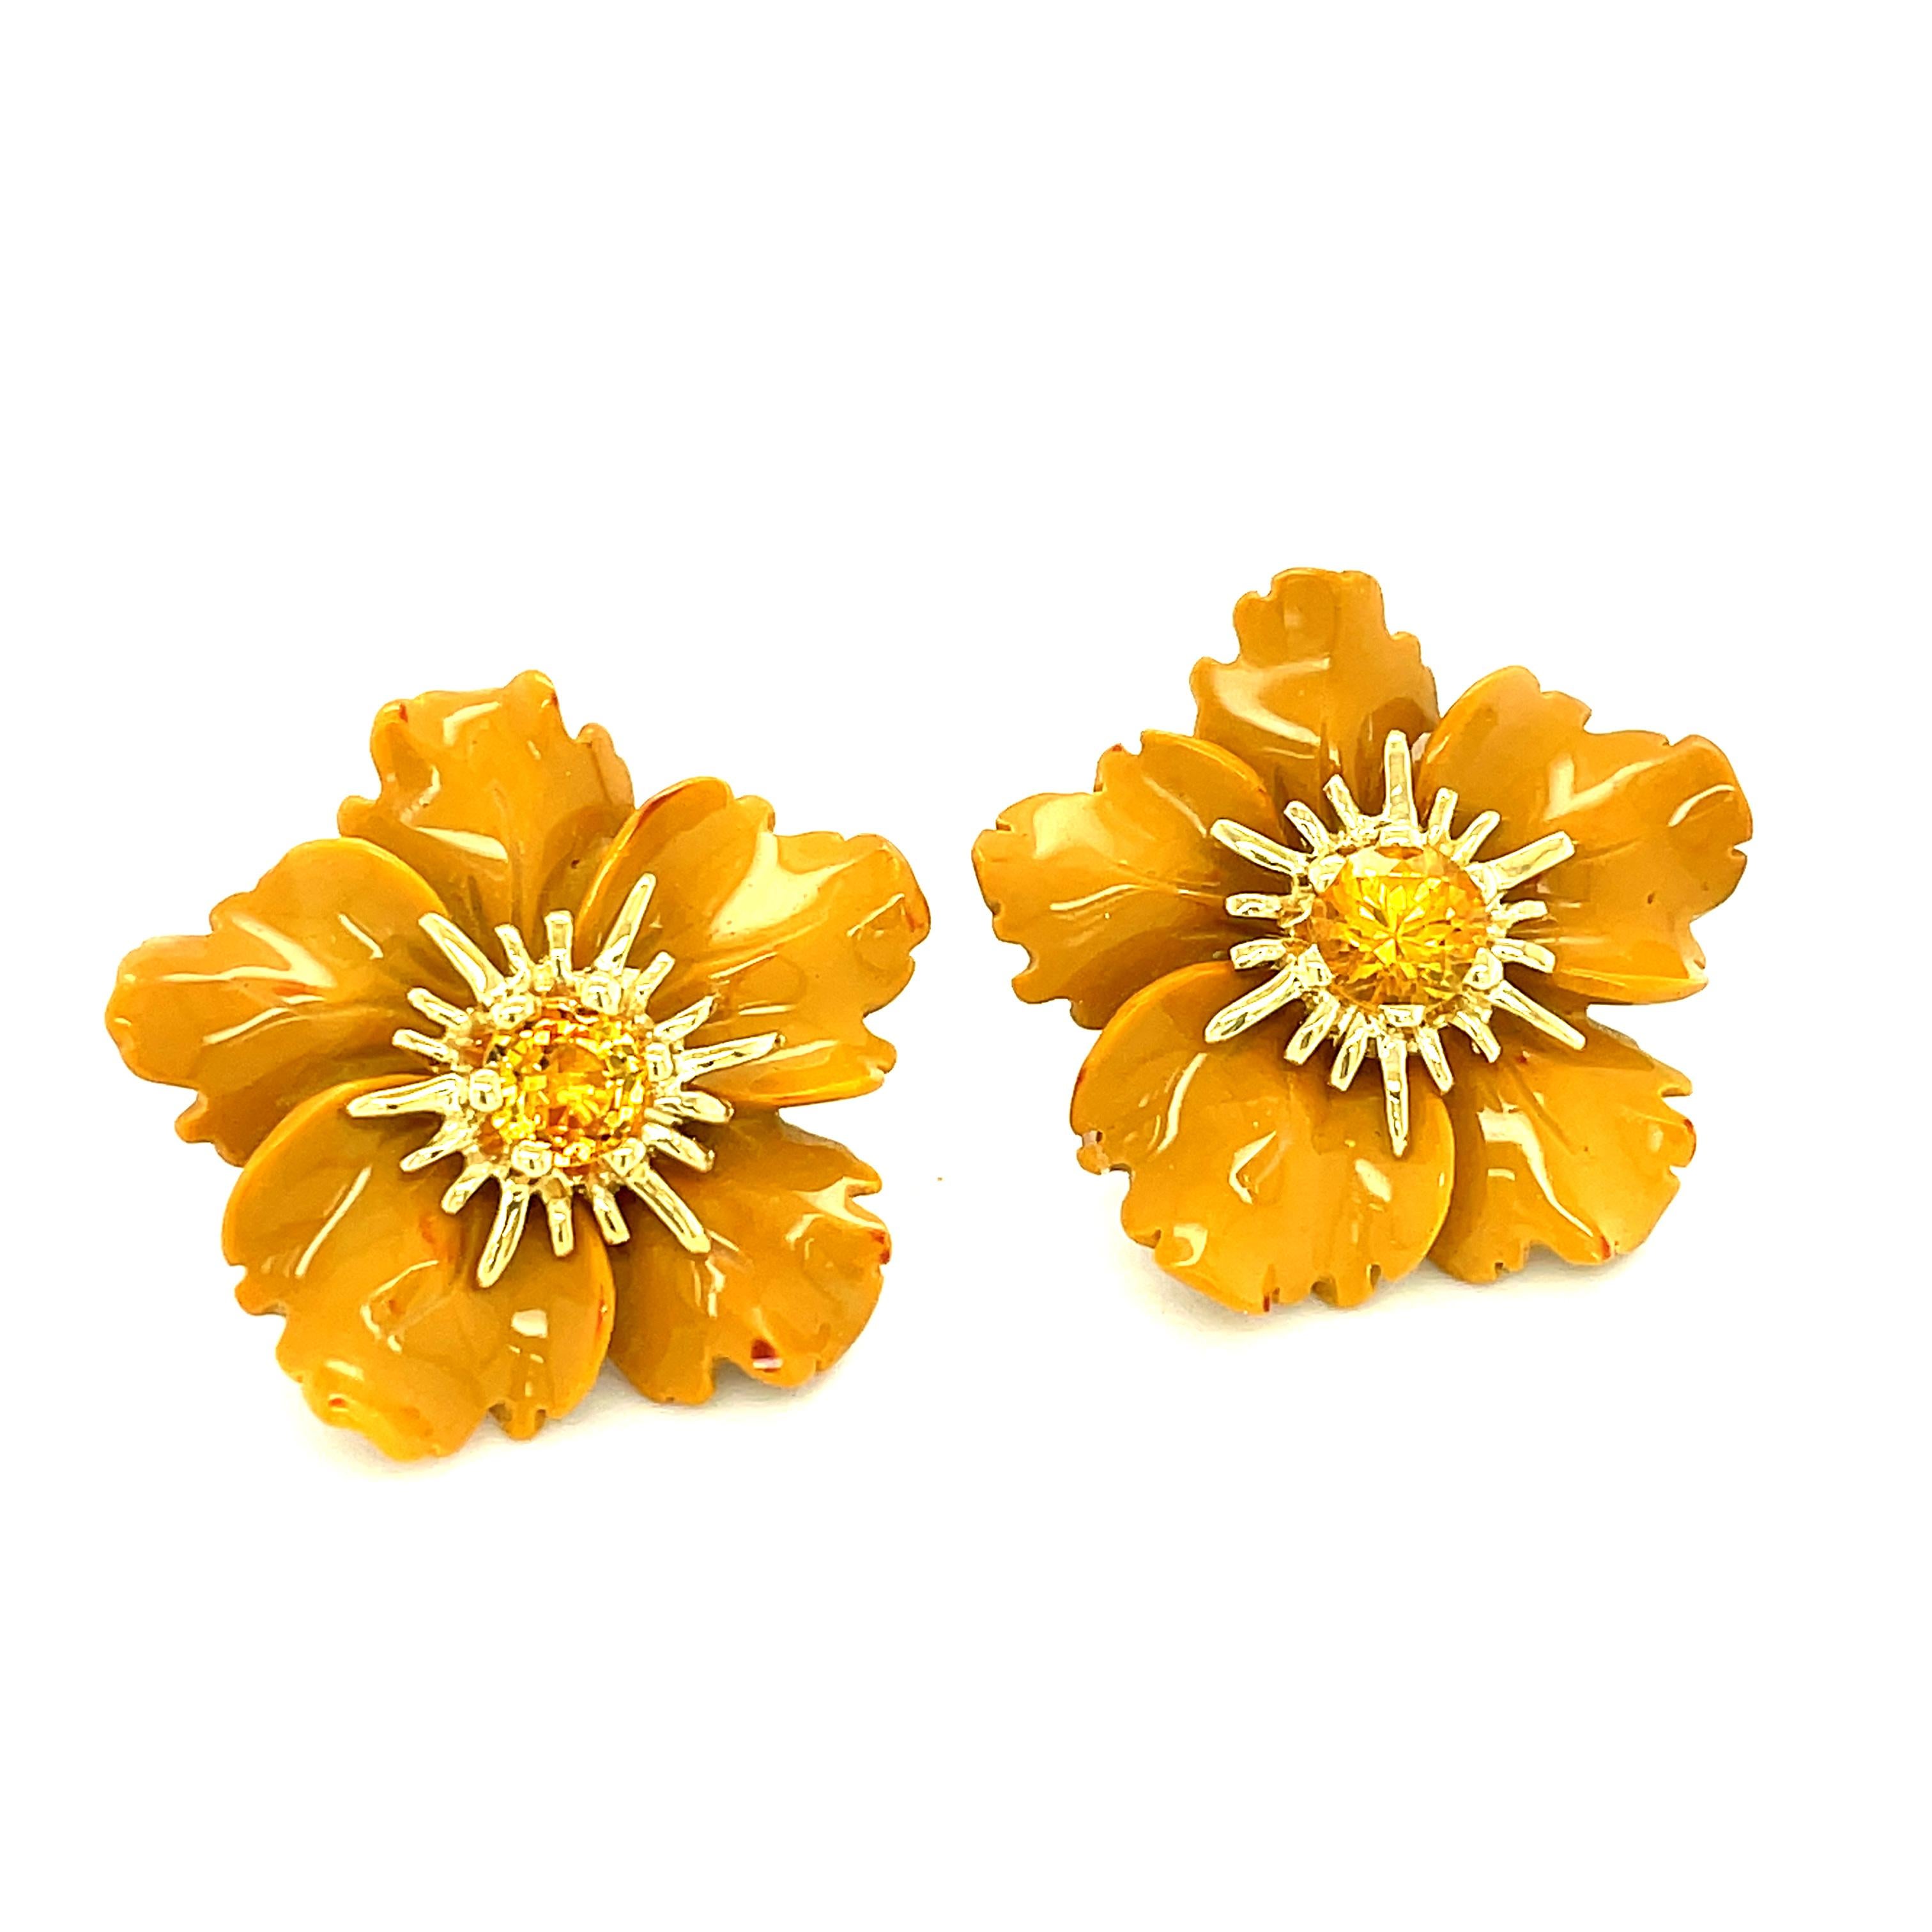 These finely hand-carved jasper earring jackets are the perfect neutral color to coordinate with most any clothing. The large, 3-dimensional flowers were intricately carved from golden jasper and look stunning paired with our 18k yellow gold post